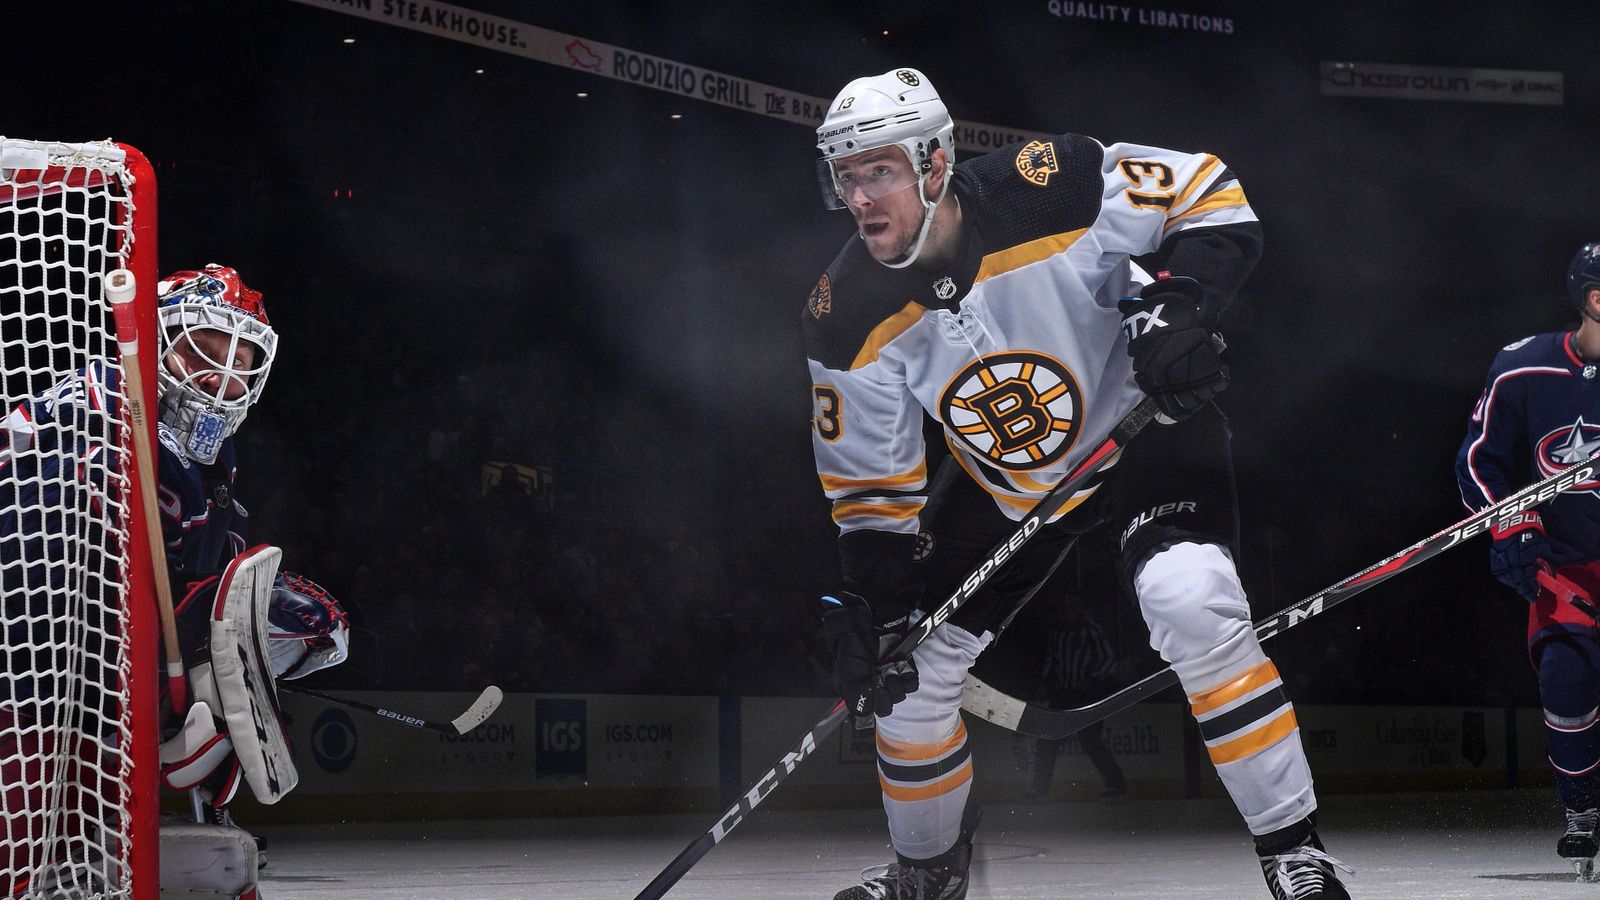 Pavel Zacha is ready for a top 6 center role with the Boston Bruins